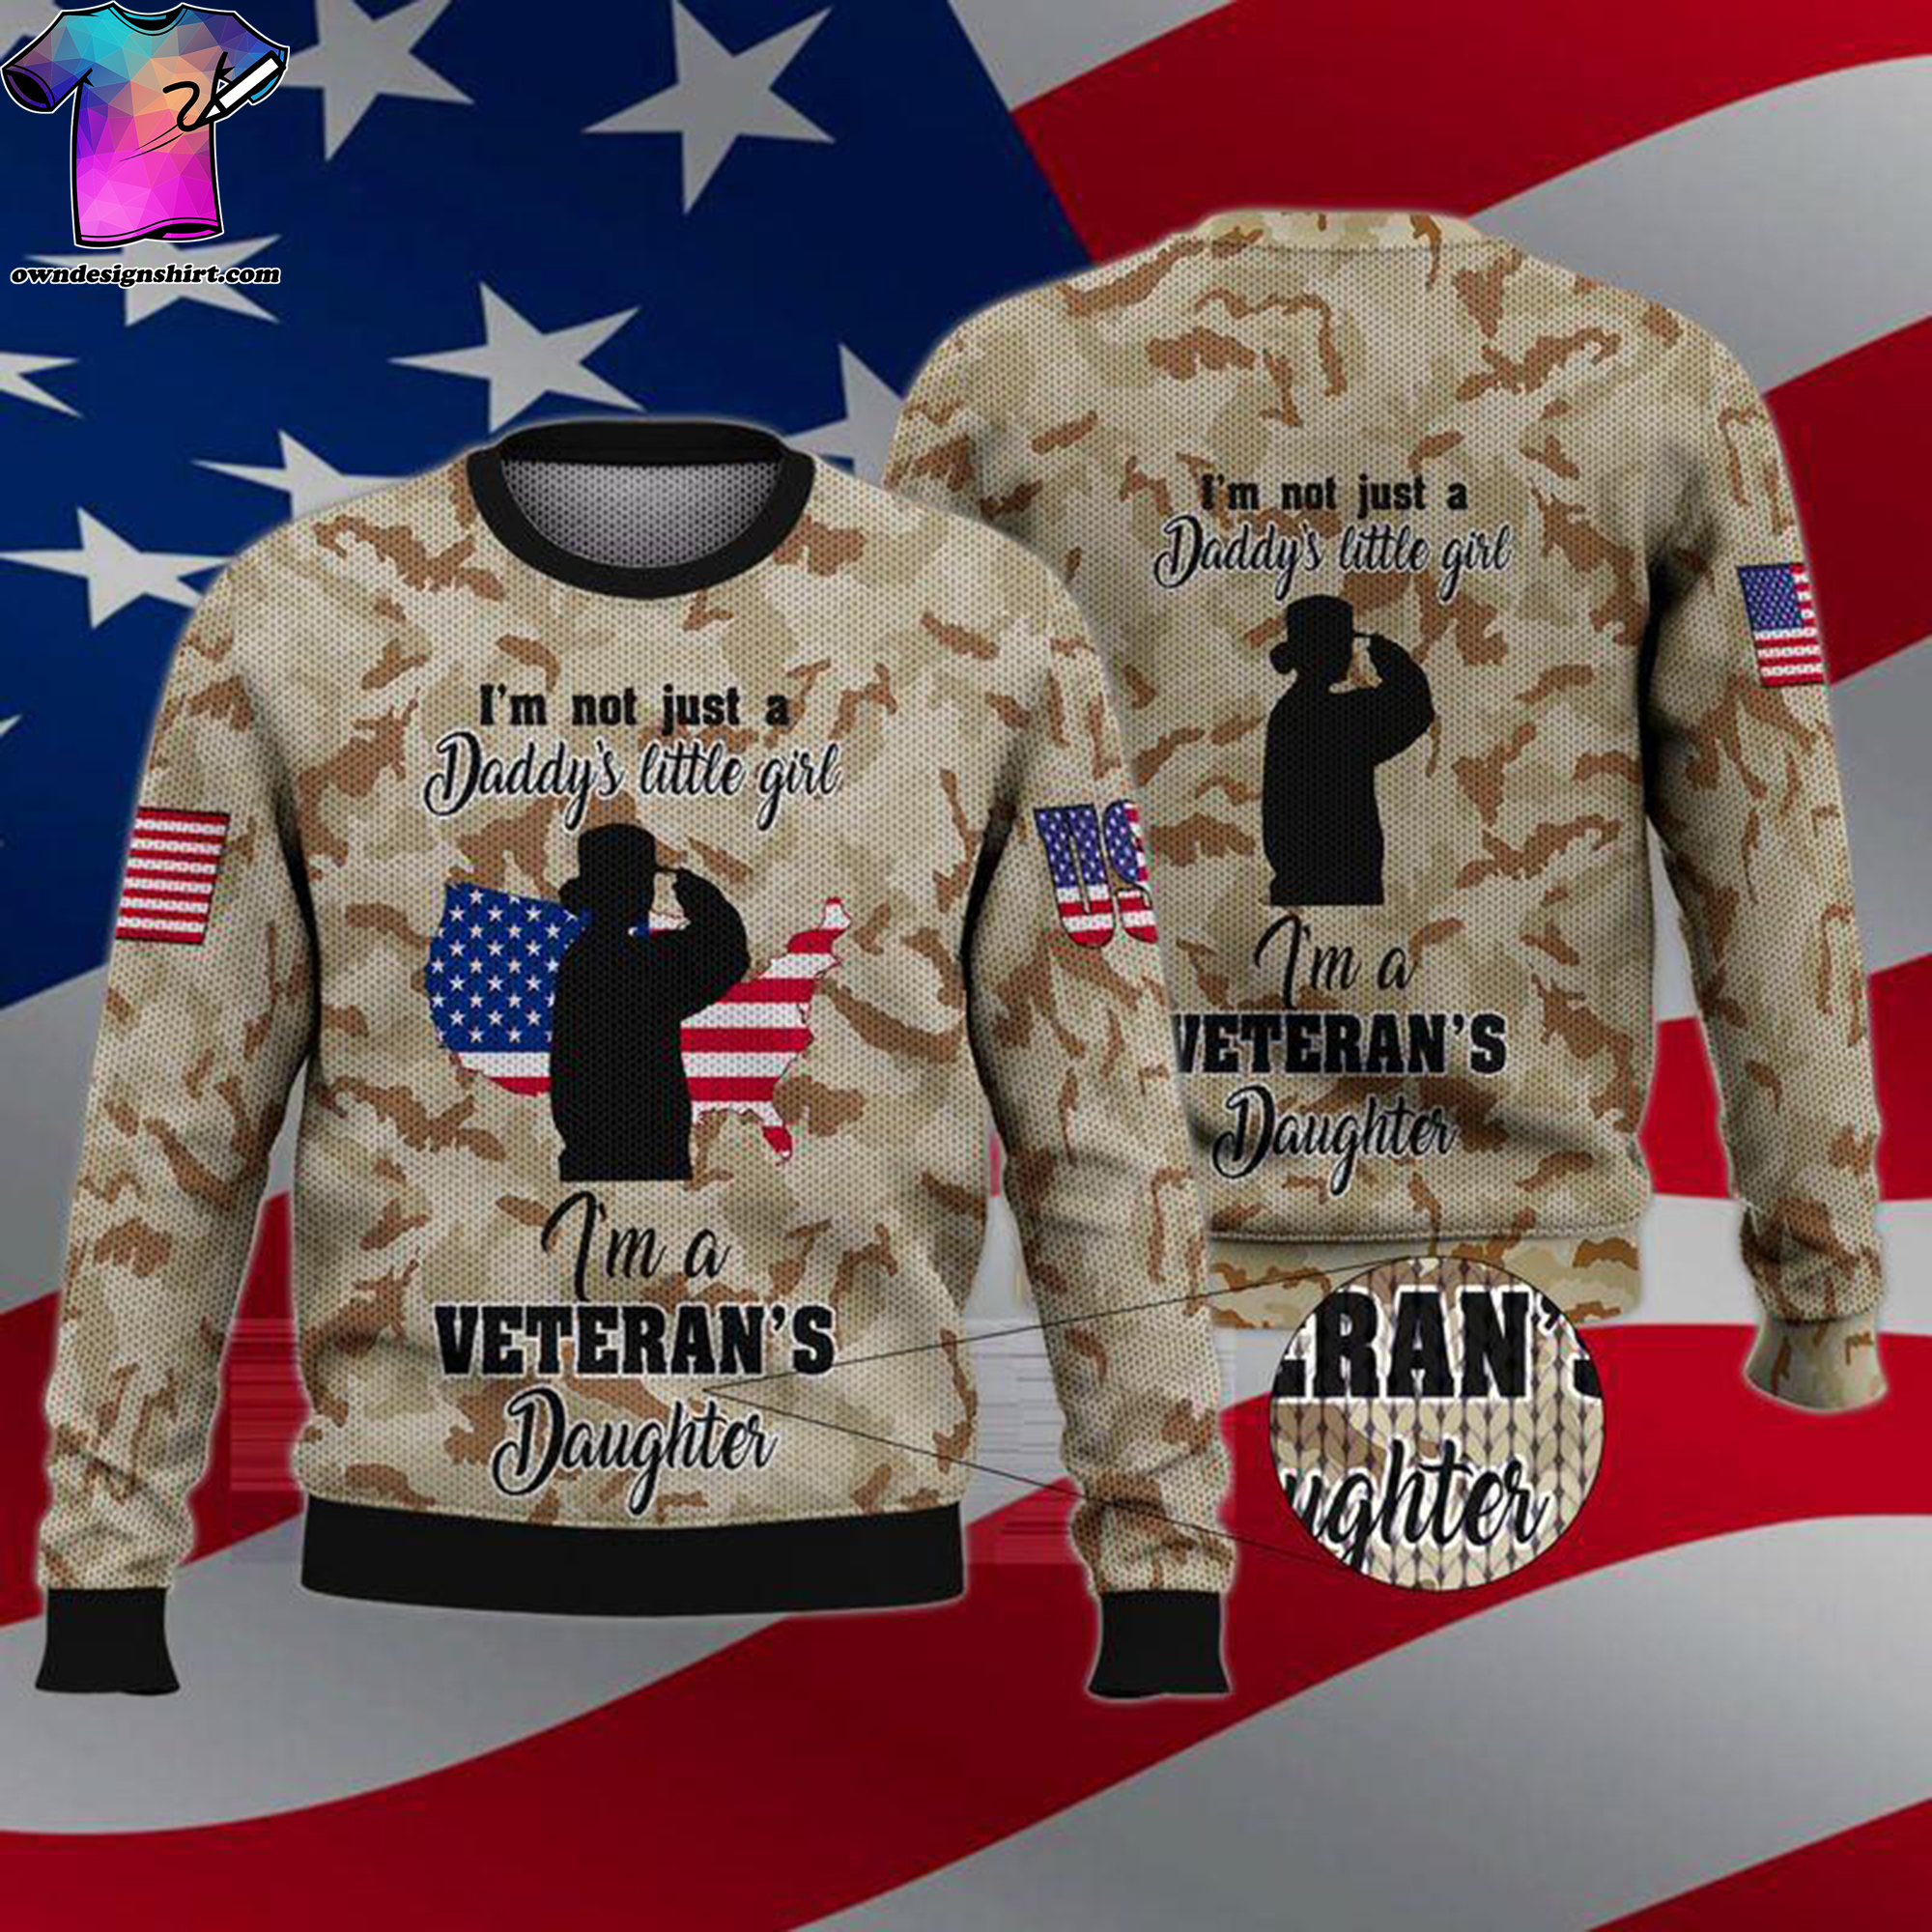 Show Your Festive Spirit The American Flag Sweater – A Cool Outfit for This Christmas